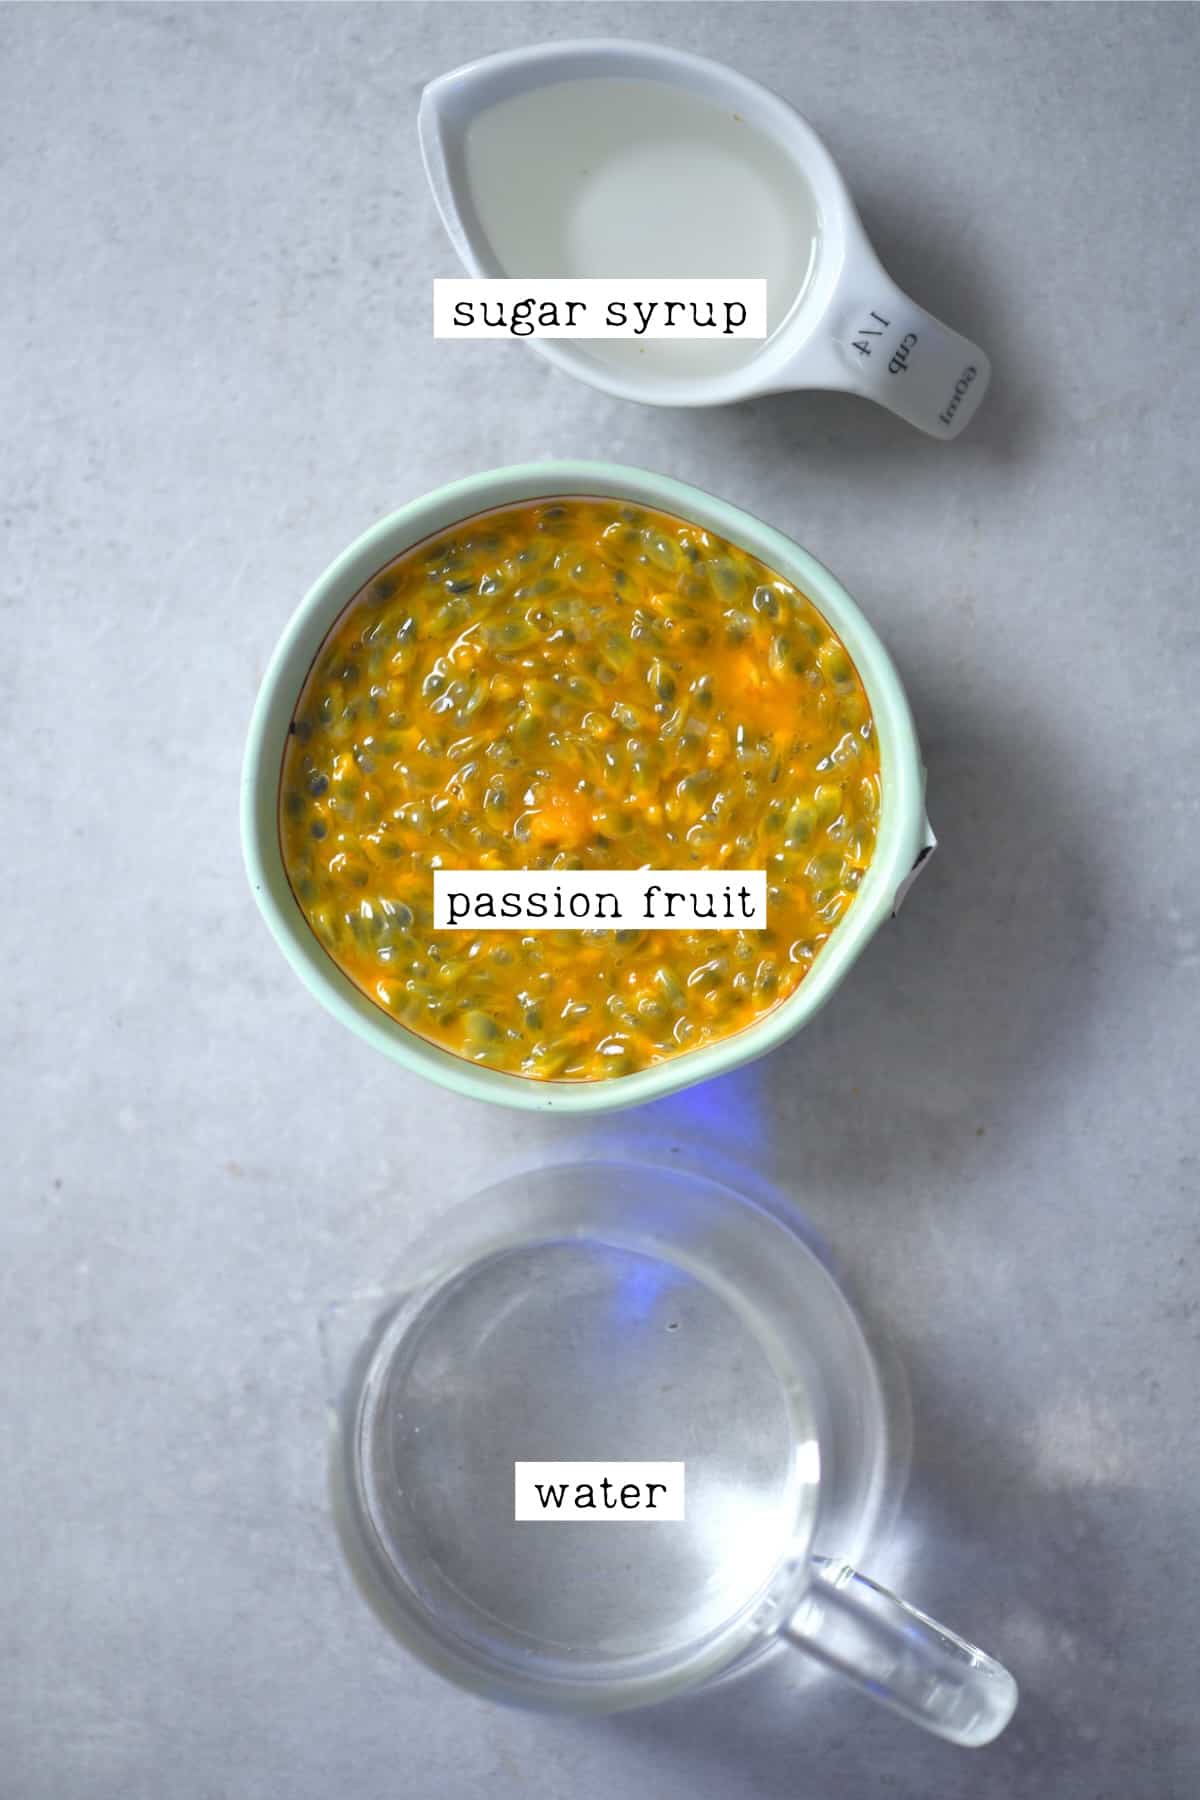 Ingredients for passion fruit juice